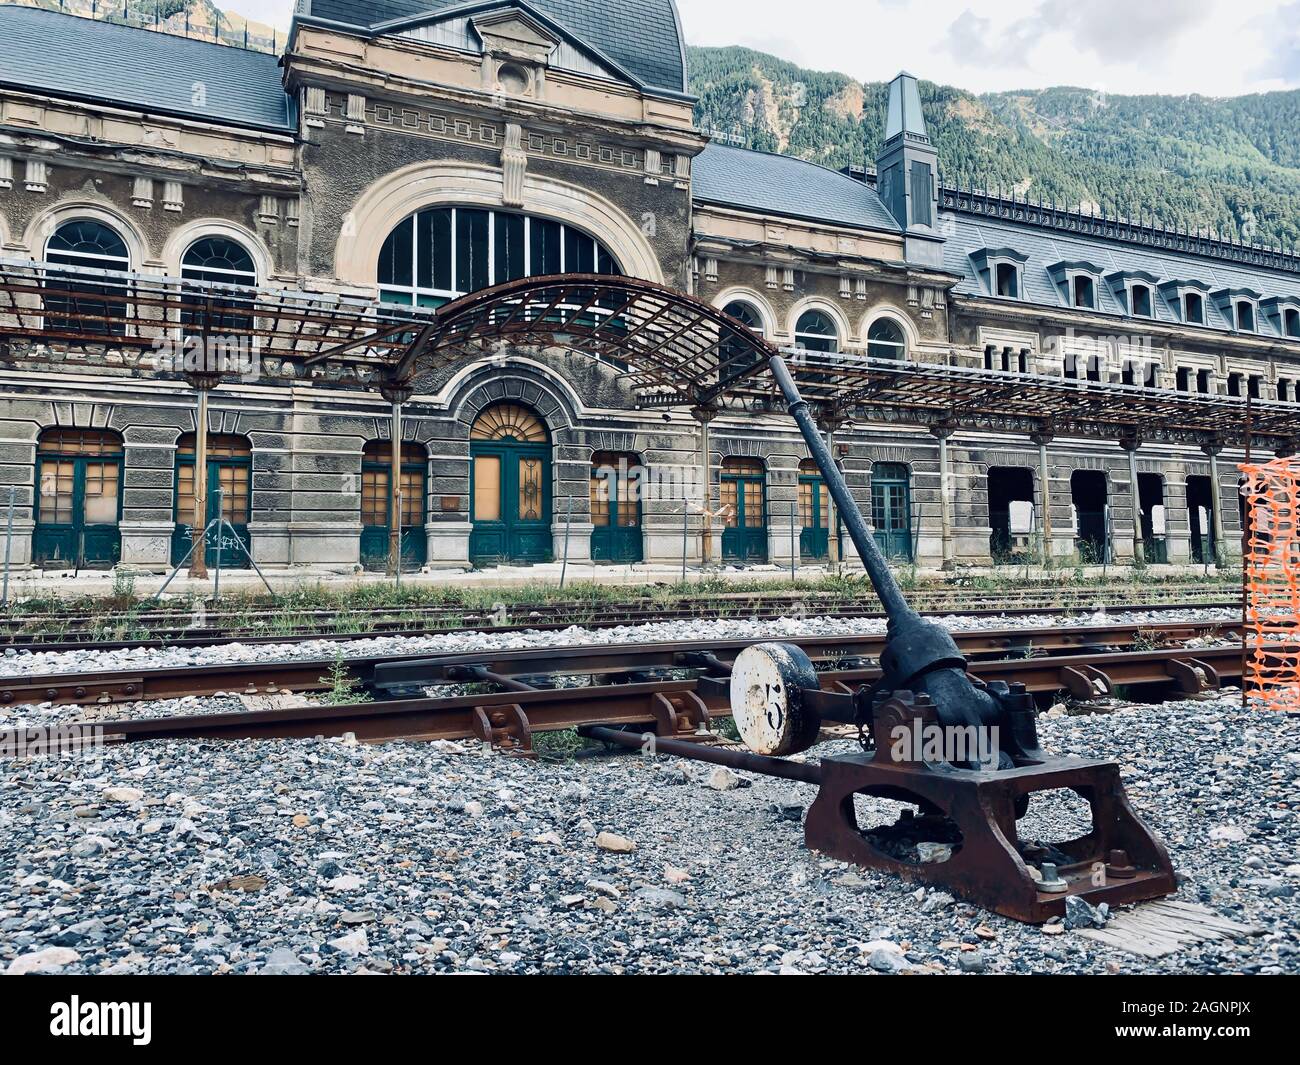 CANFRANC, SPAIN - JUN 2019: Abandoned Canfranc International railway station in the Spanish Pyrenees, Spain Stock Photo